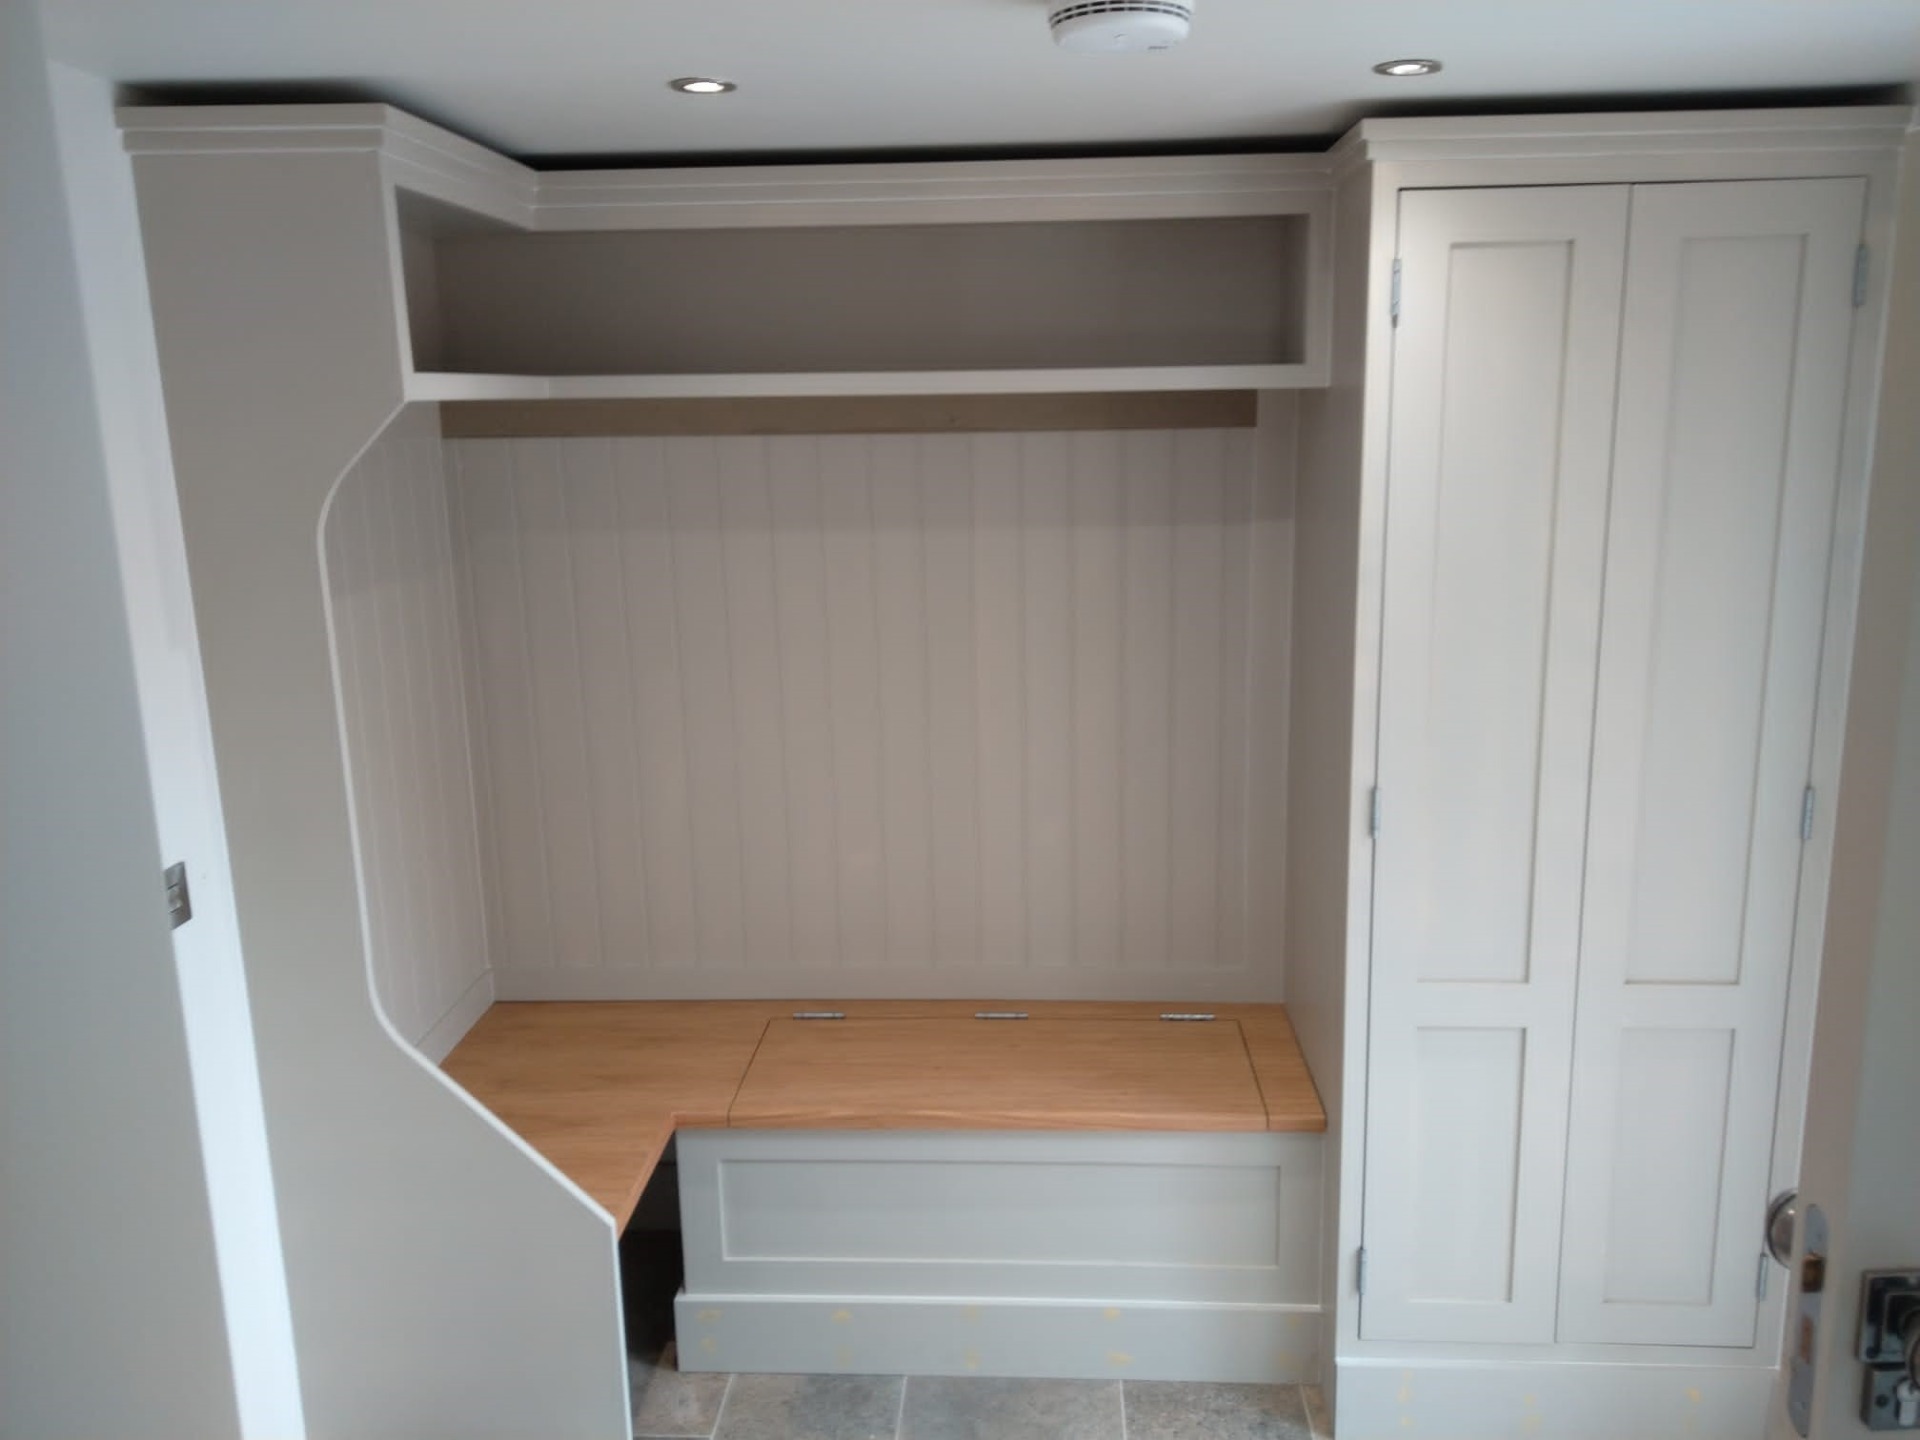 Kitchen storage units, part of a barn conversion in West Sussex.